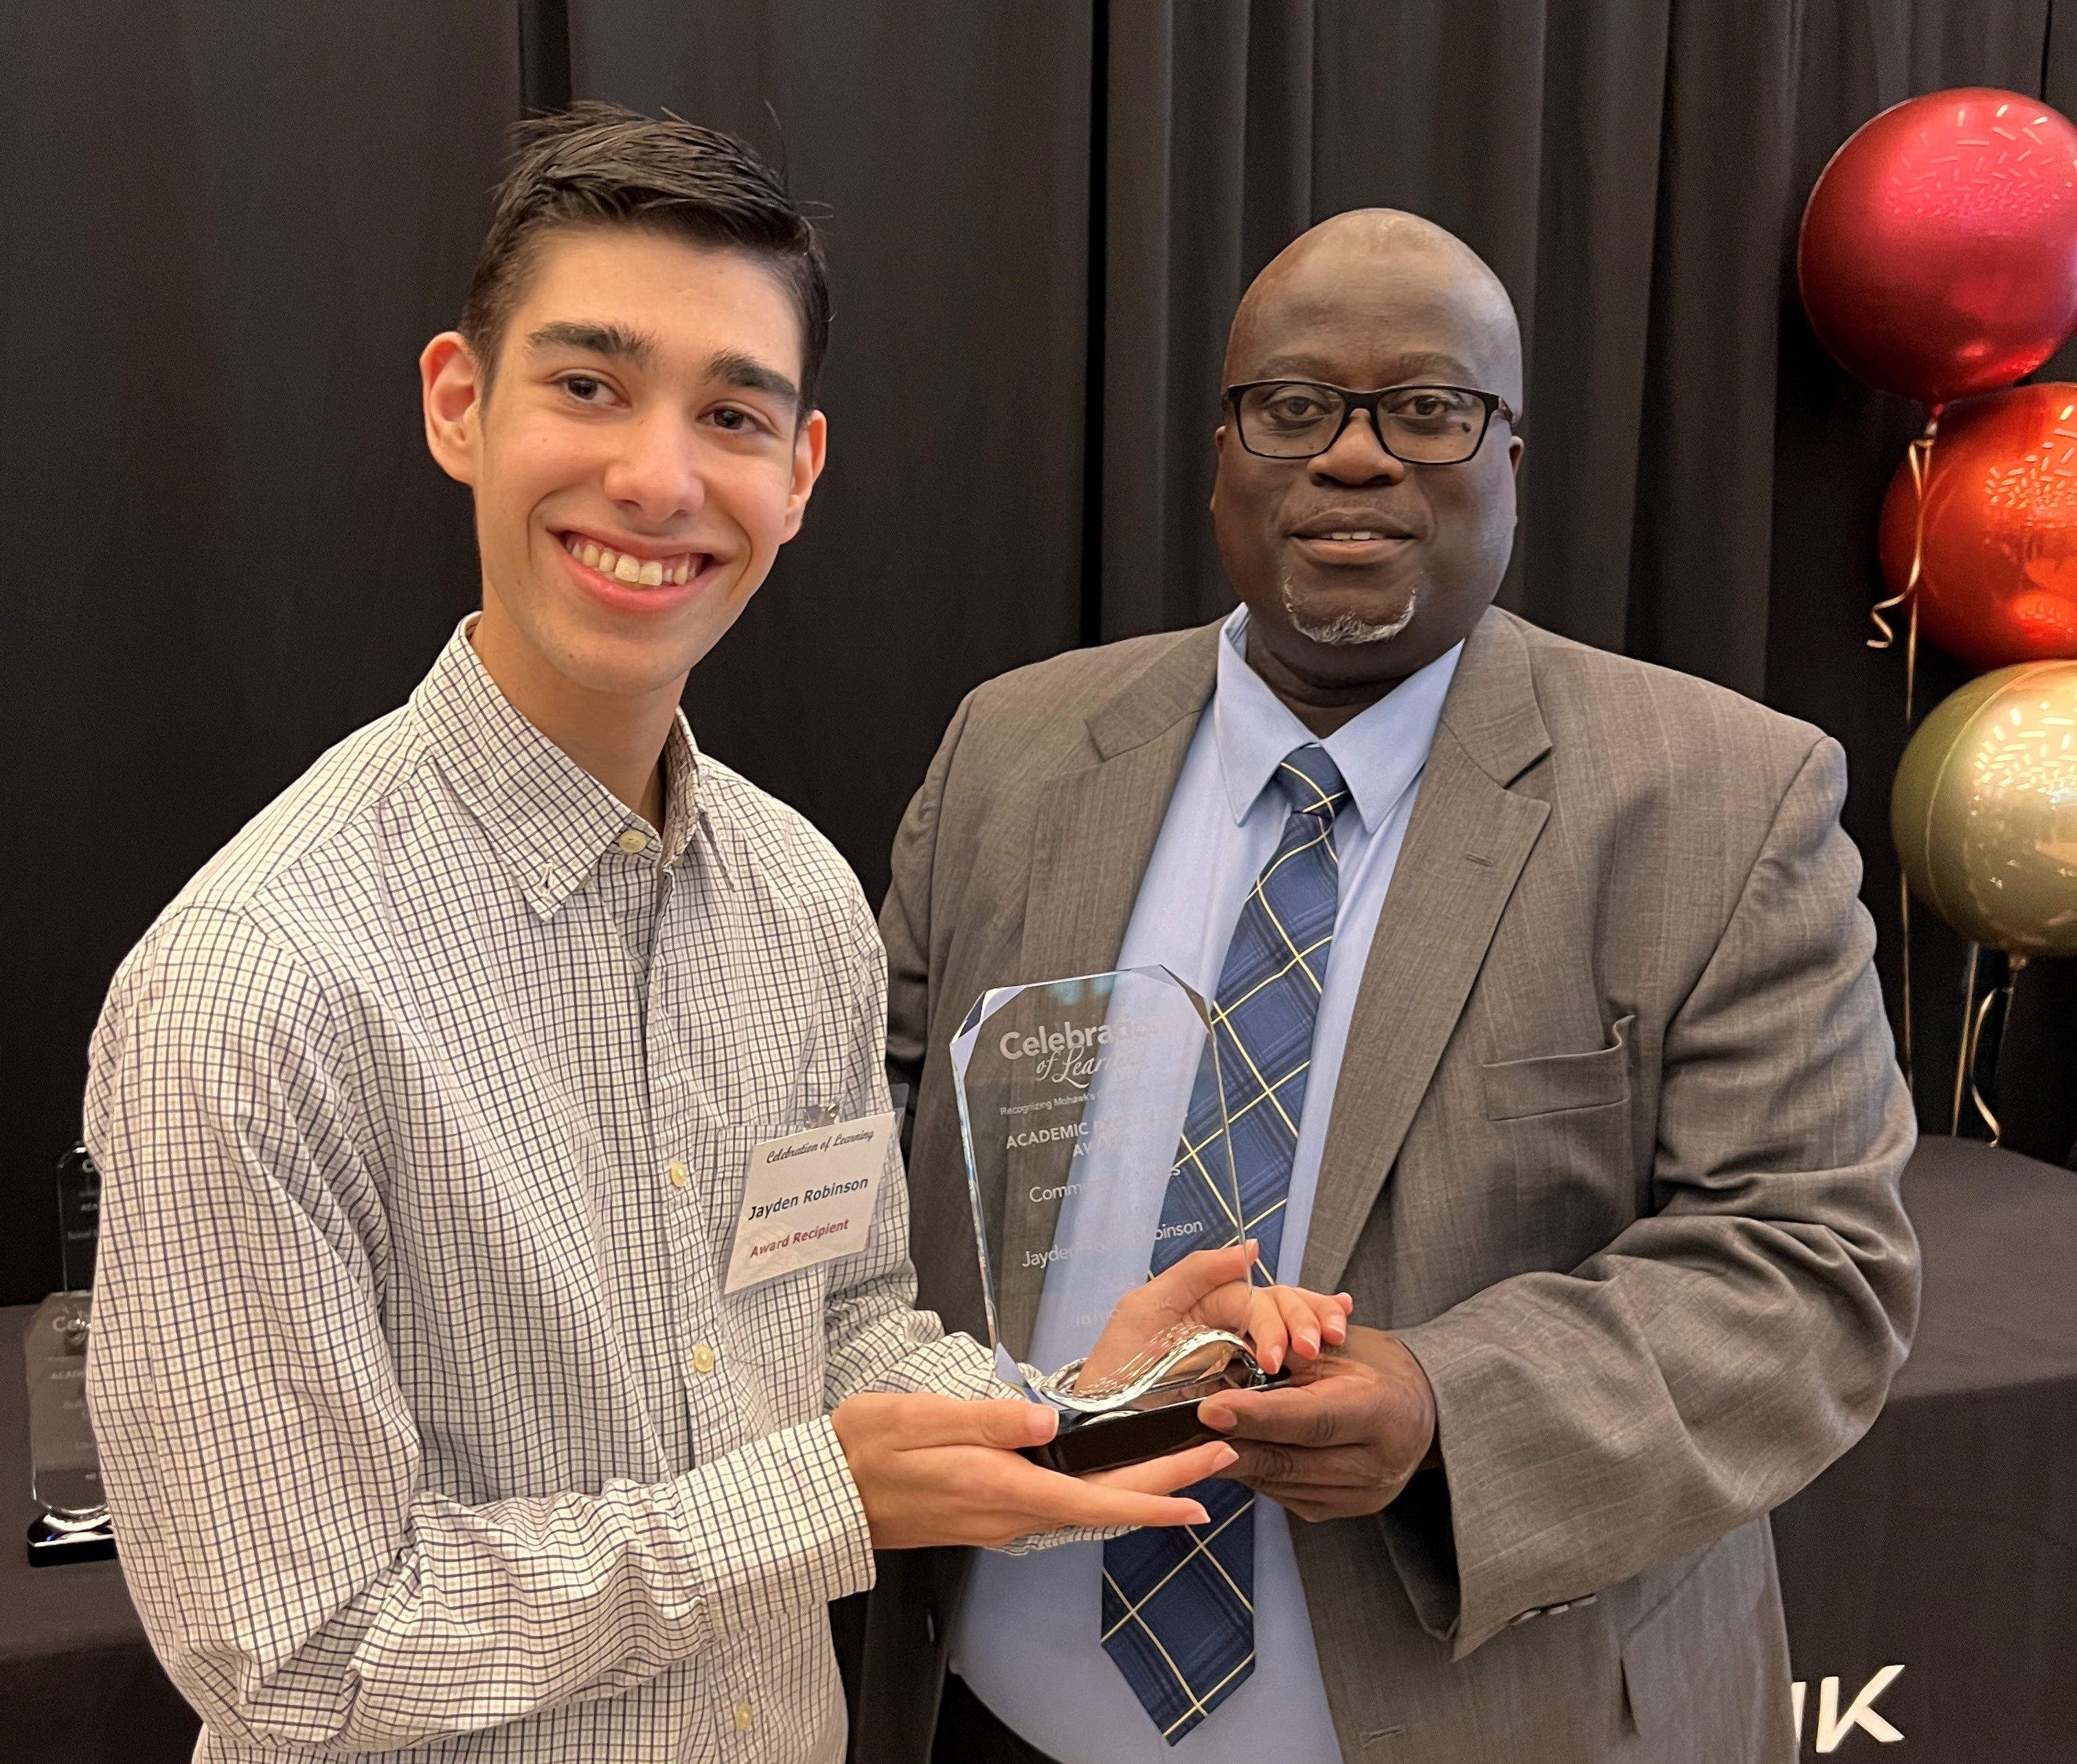 Jayden posing with Cebert Adamson, VP of Academics at Mohawk College, holding the plaque for the Academic Excellence Award